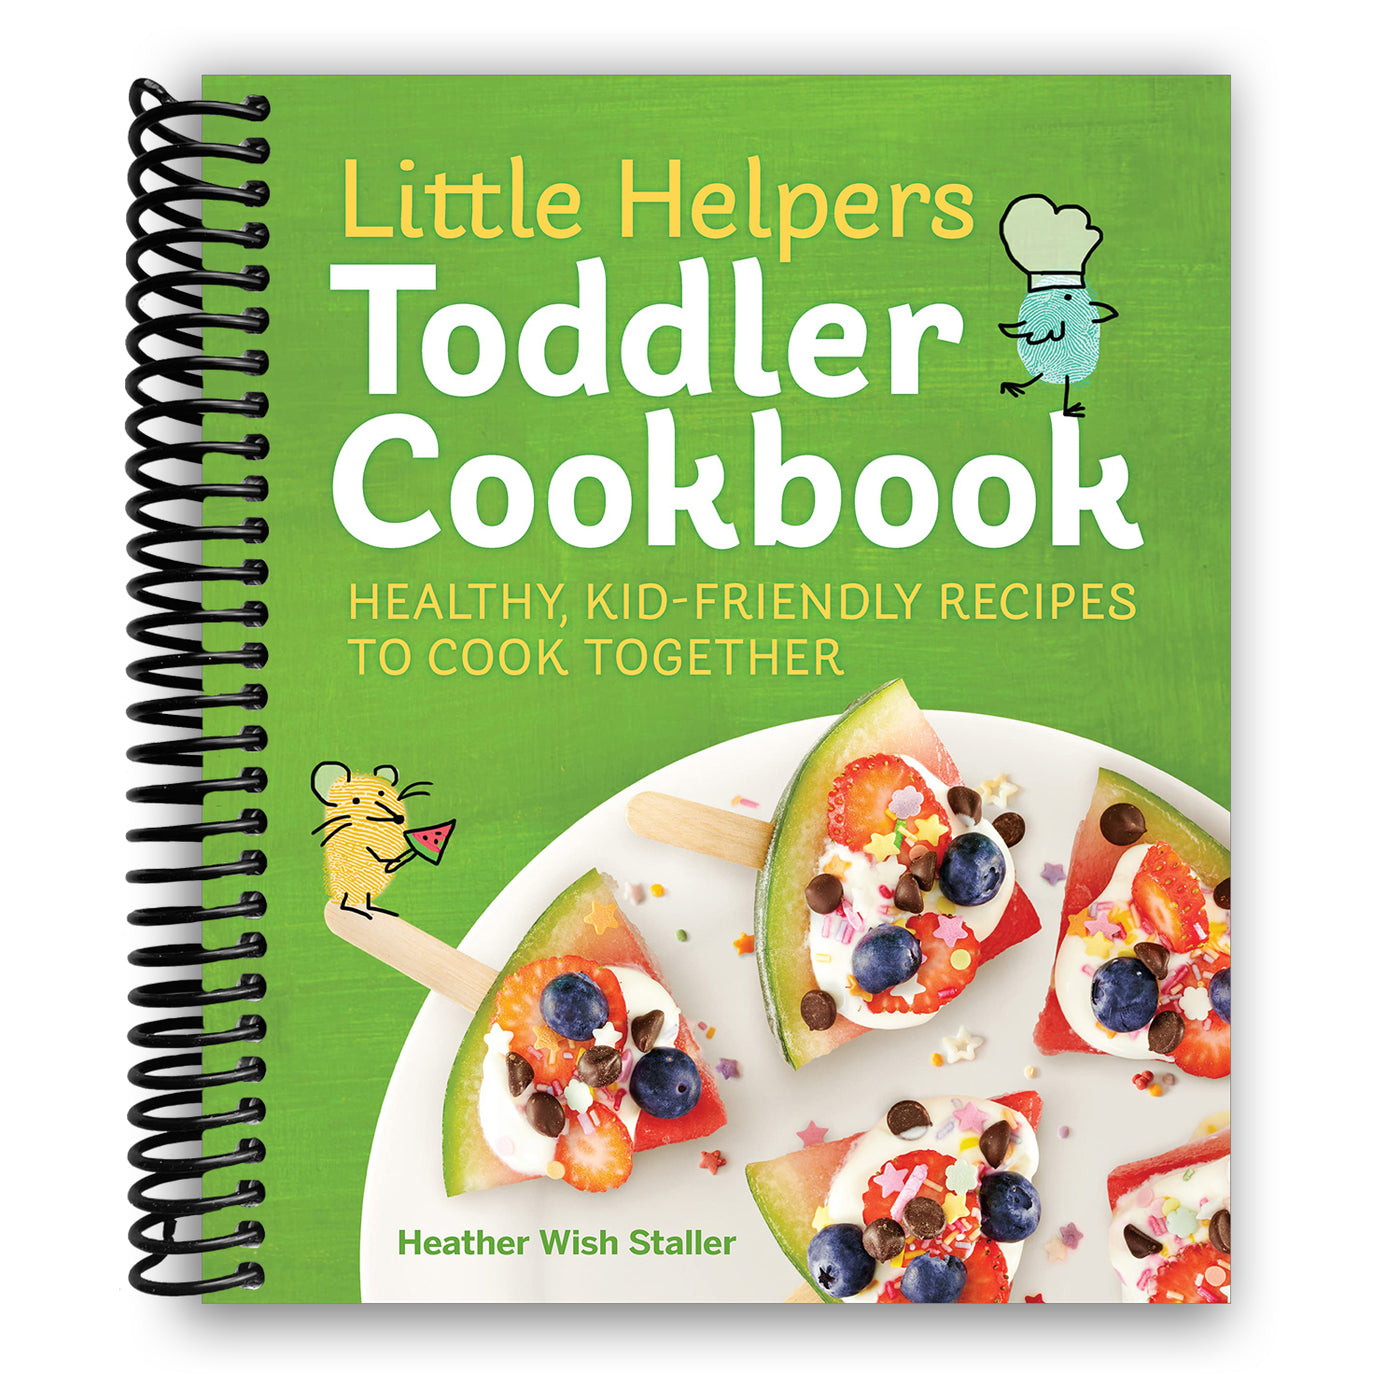 Little Helpers Toddler Cookbook: Healthy, Kid-Friendly Recipes to Cook Together (Spiral Bound)